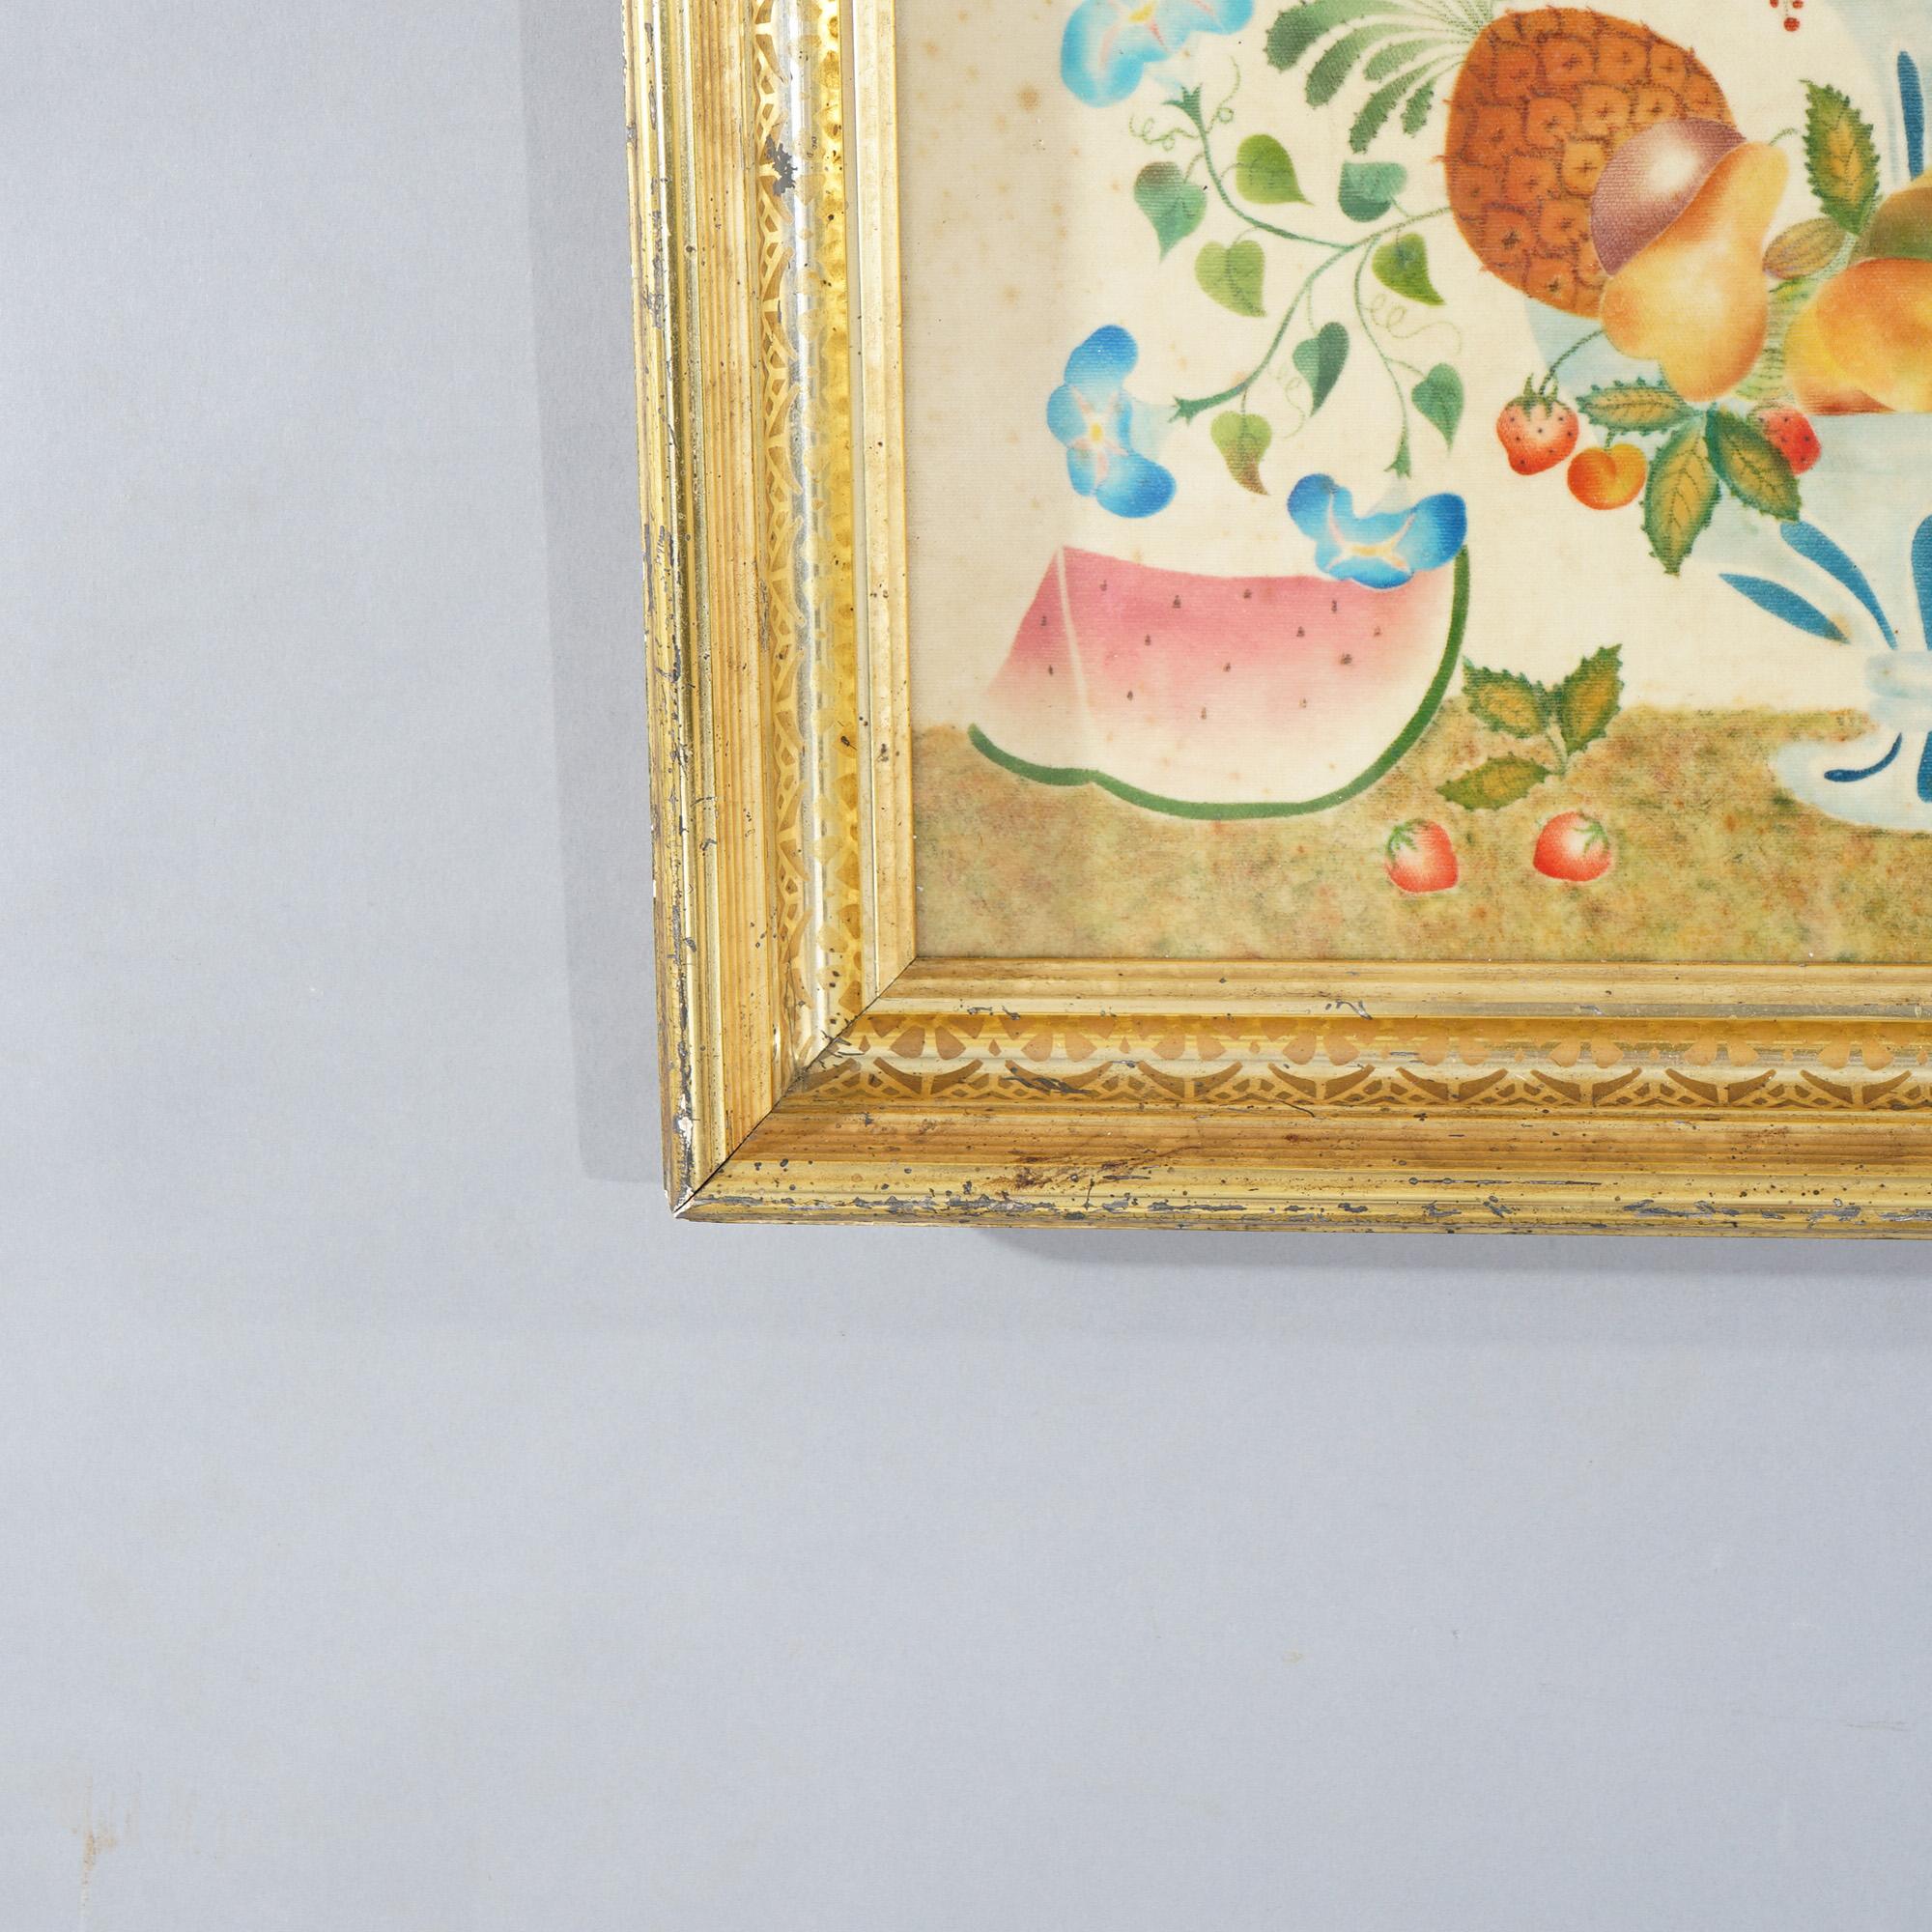 19th Century Antique Victorian Still Life Theorem with Fruit & Butterflies C1850